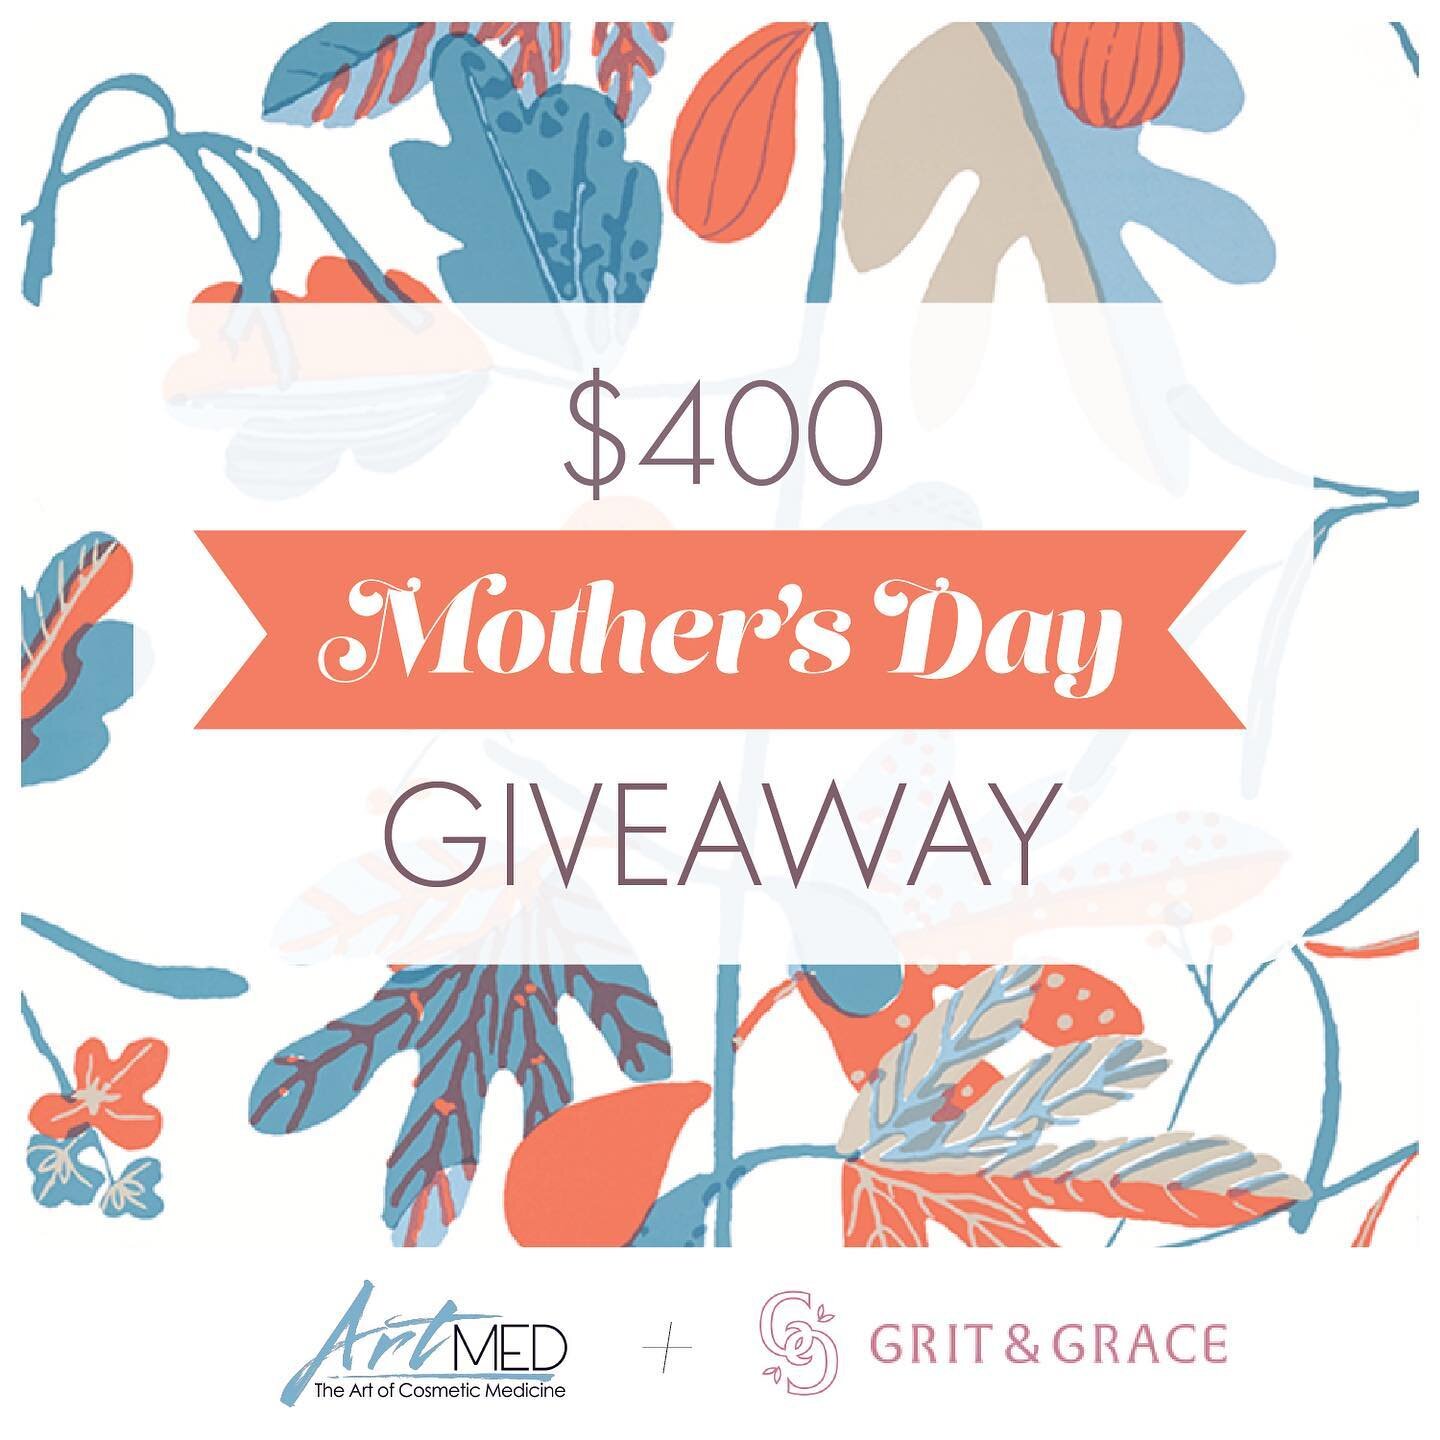 🌷$400 MOTHER'S DAY GIVEAWAY🌼

Treat the mother figure in your life to a pampering session at @artmedguelph and shopping spree at @gritandgraceclothing ✨

Prize includes&hellip;
🌸 A Deluxe European Style Facial at ArtMed (Valued at $215)
🌸 A $175 